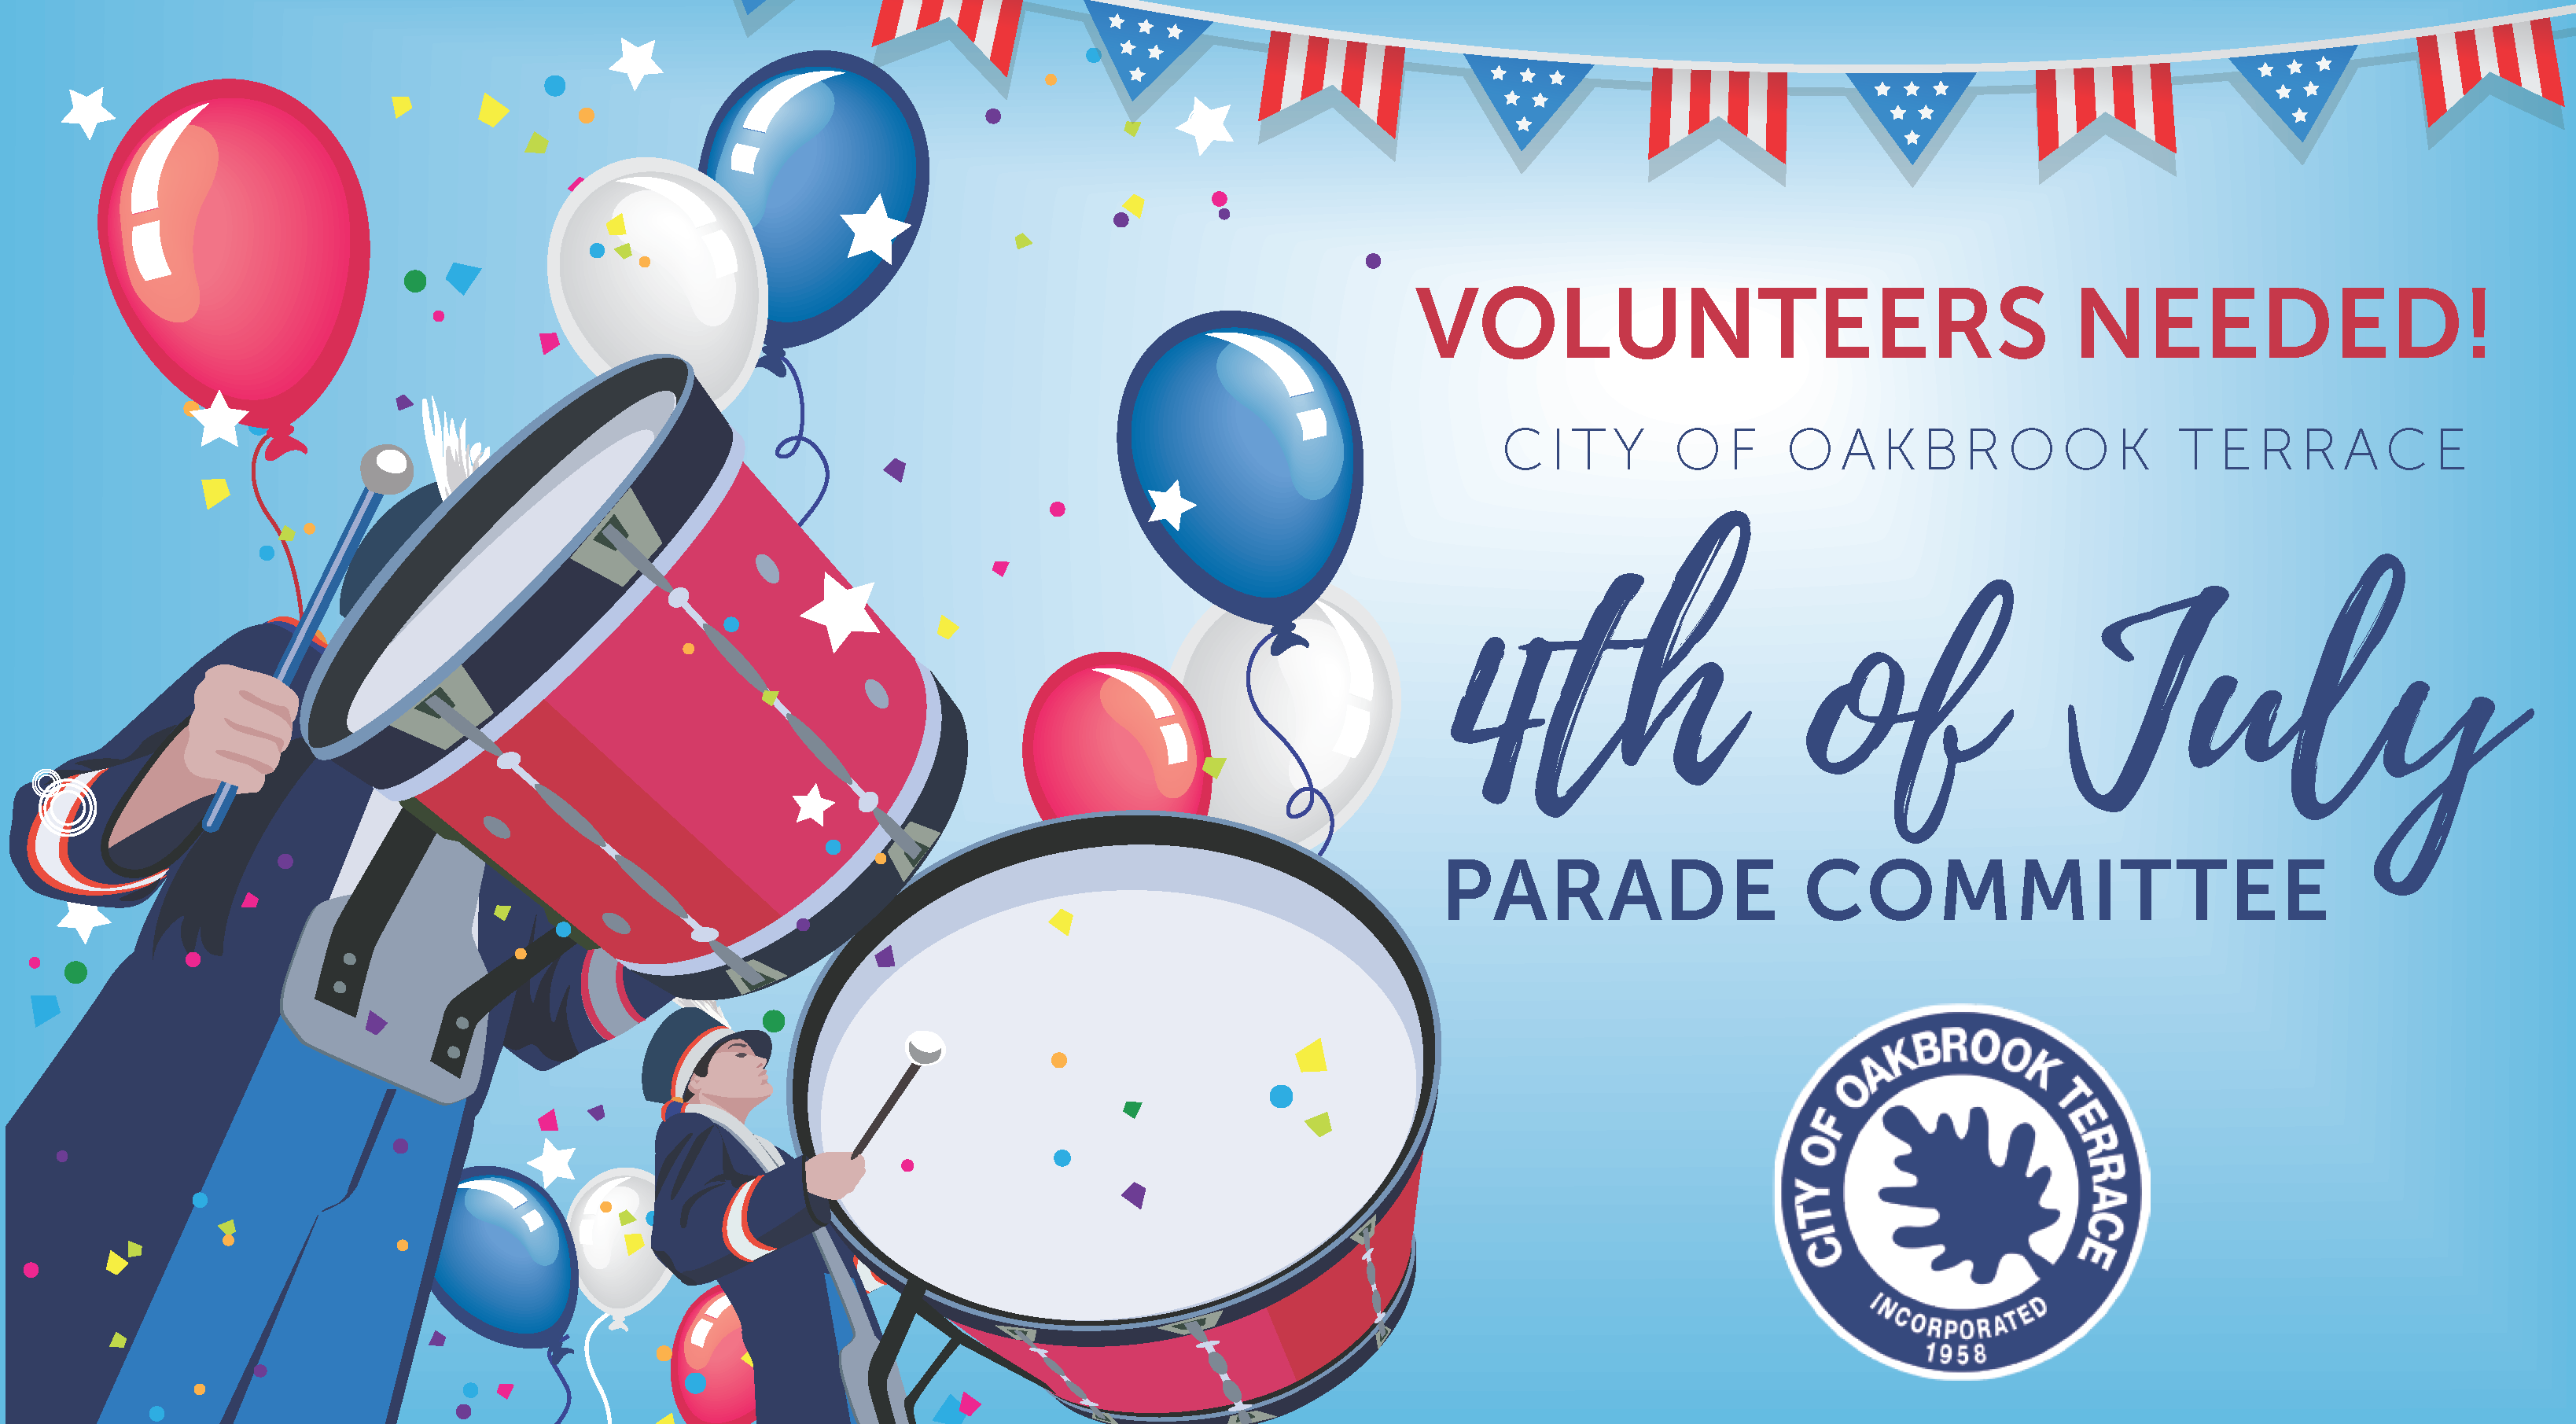 volunteers-needed-4th-of-july-parade-committee-oakbrook-terrace-il